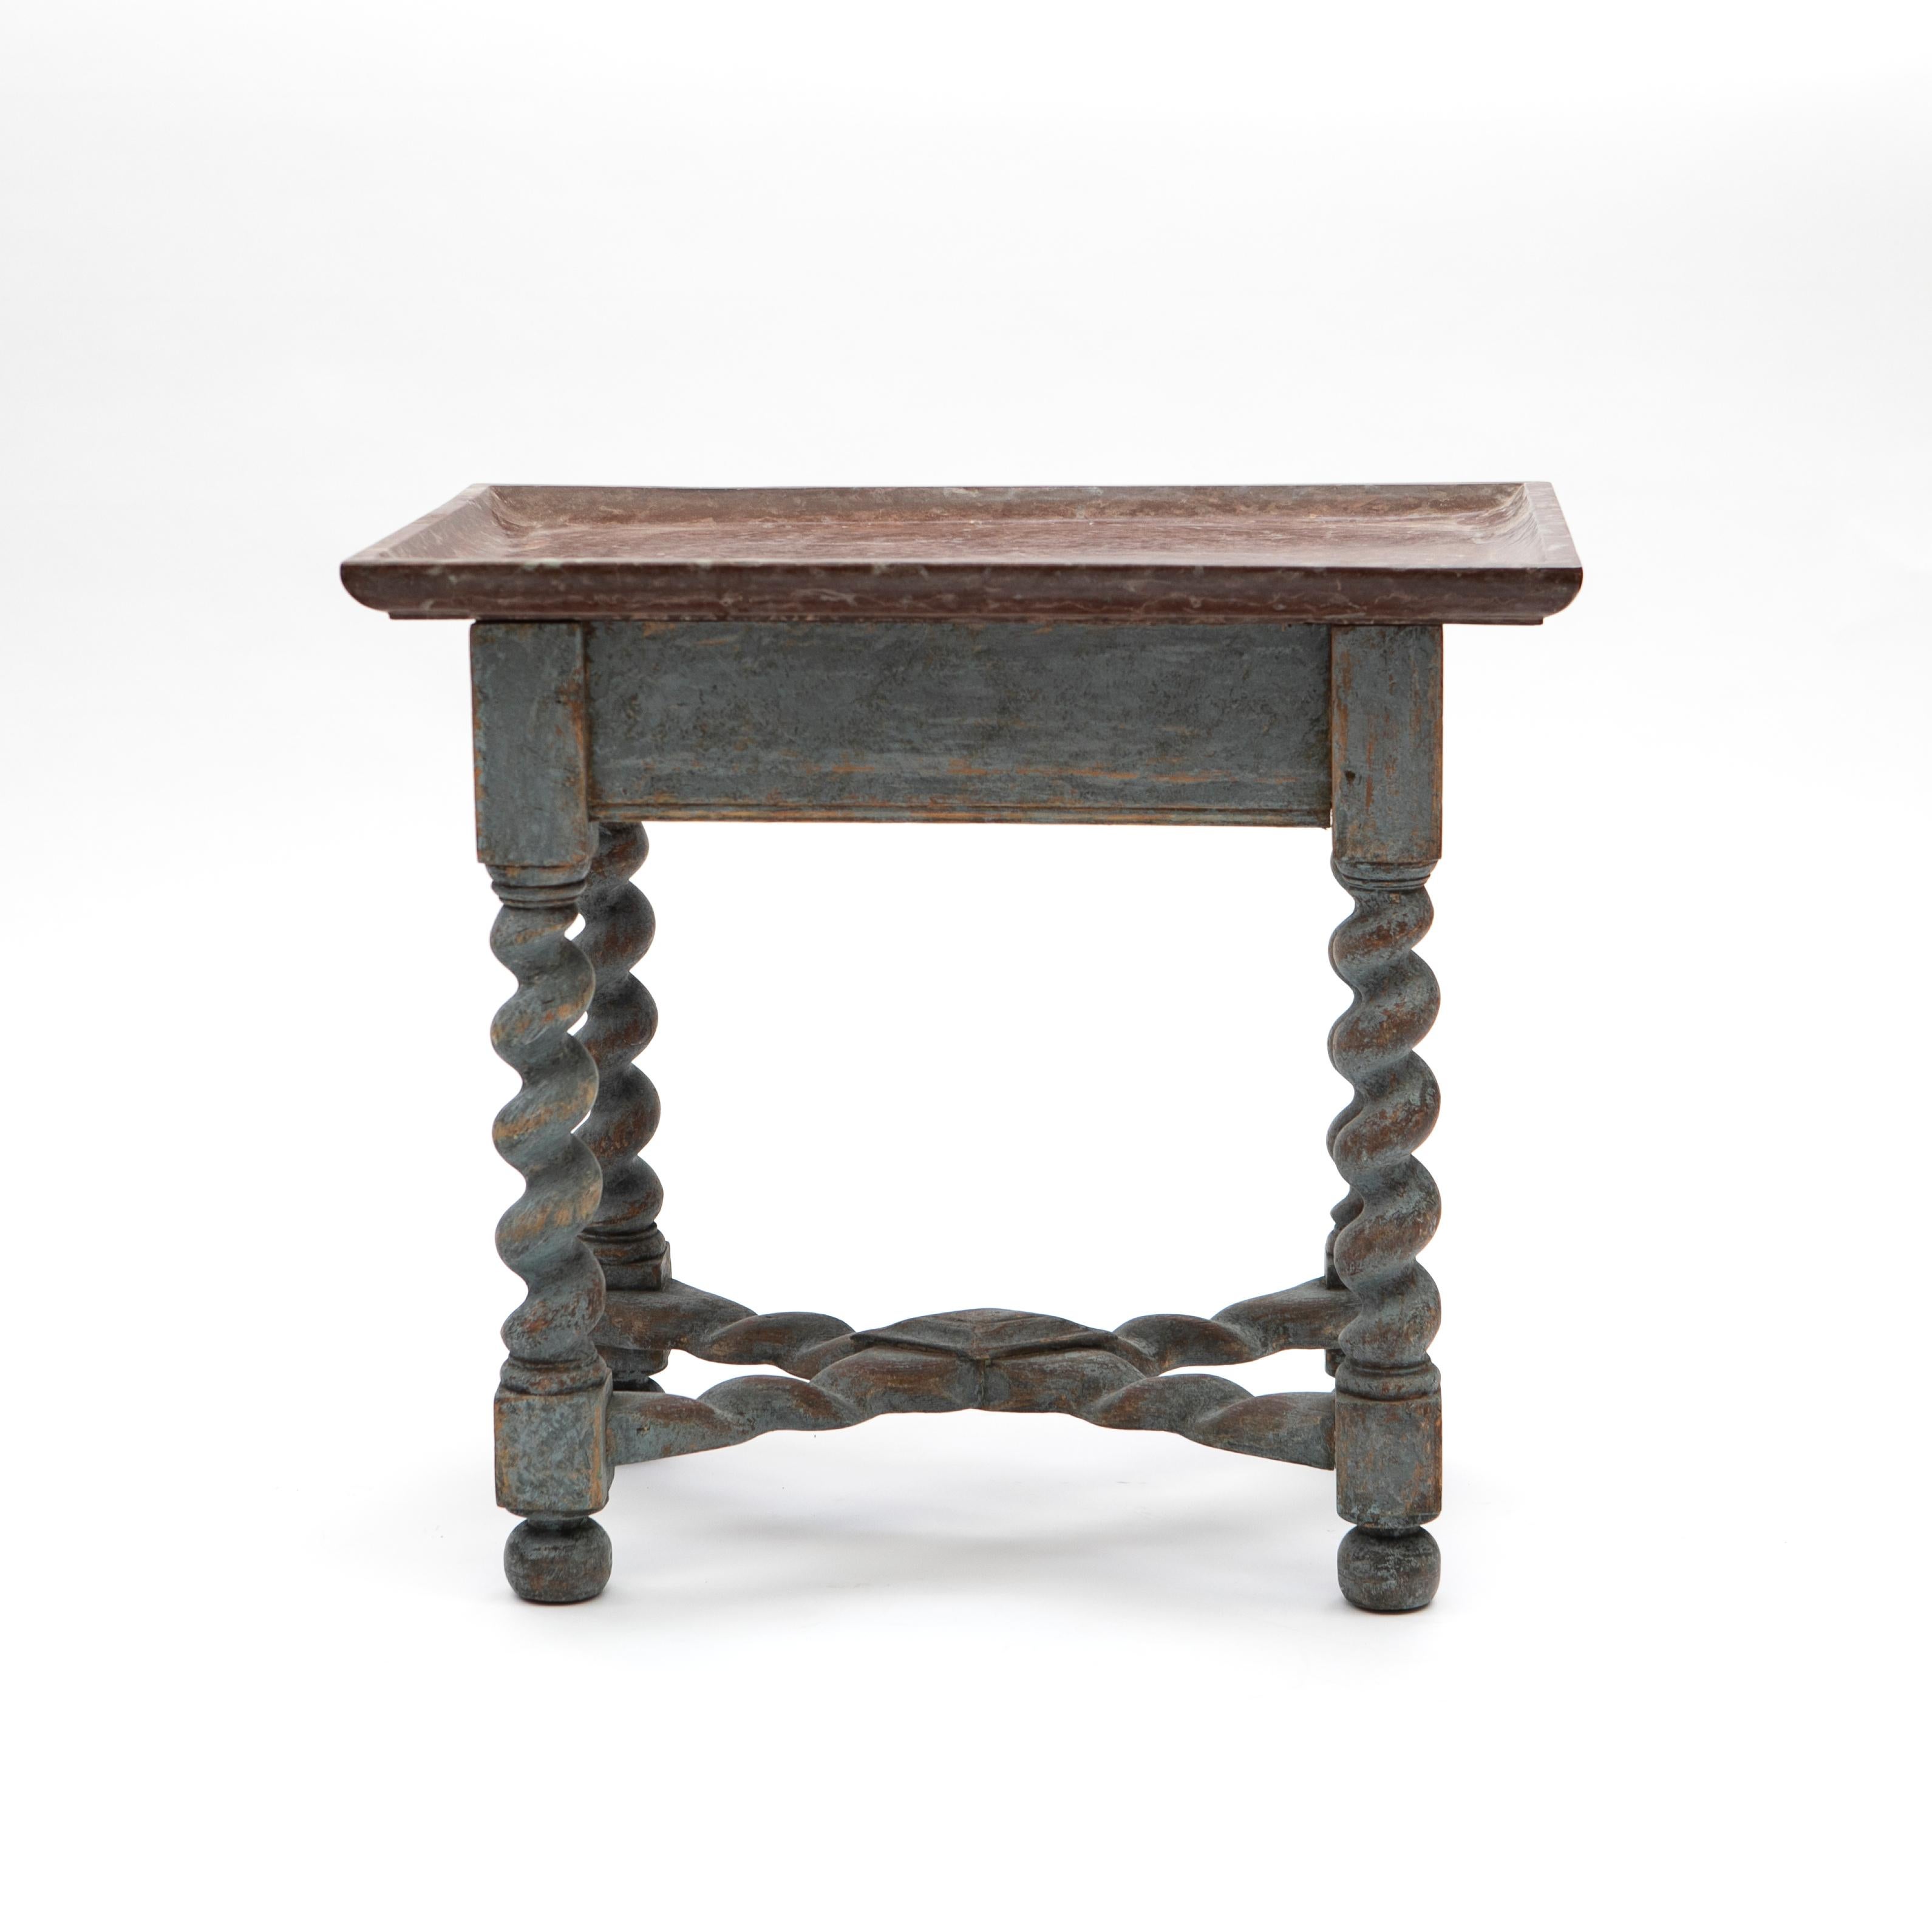 Swedish Baroque table with limestone tray table top.
Rouge Öland limestone top table above a light blue painted pine frame with corkscrew legs and X-stretcher ending in turned feet.
Later professional painted.

A beautiful and decorative